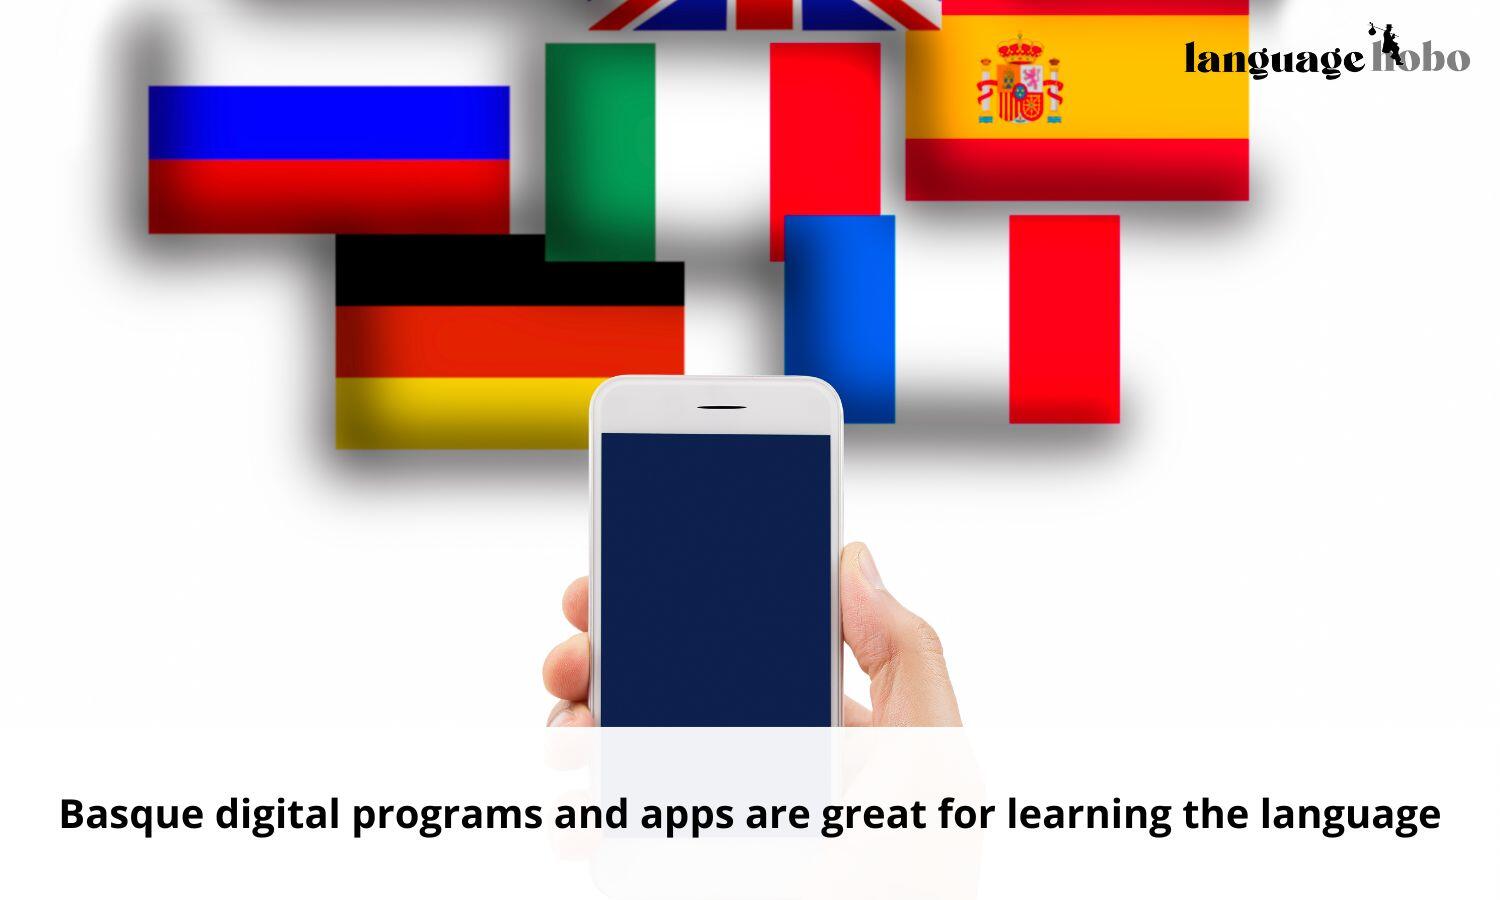 Basque digital programs and apps are great for learning the language